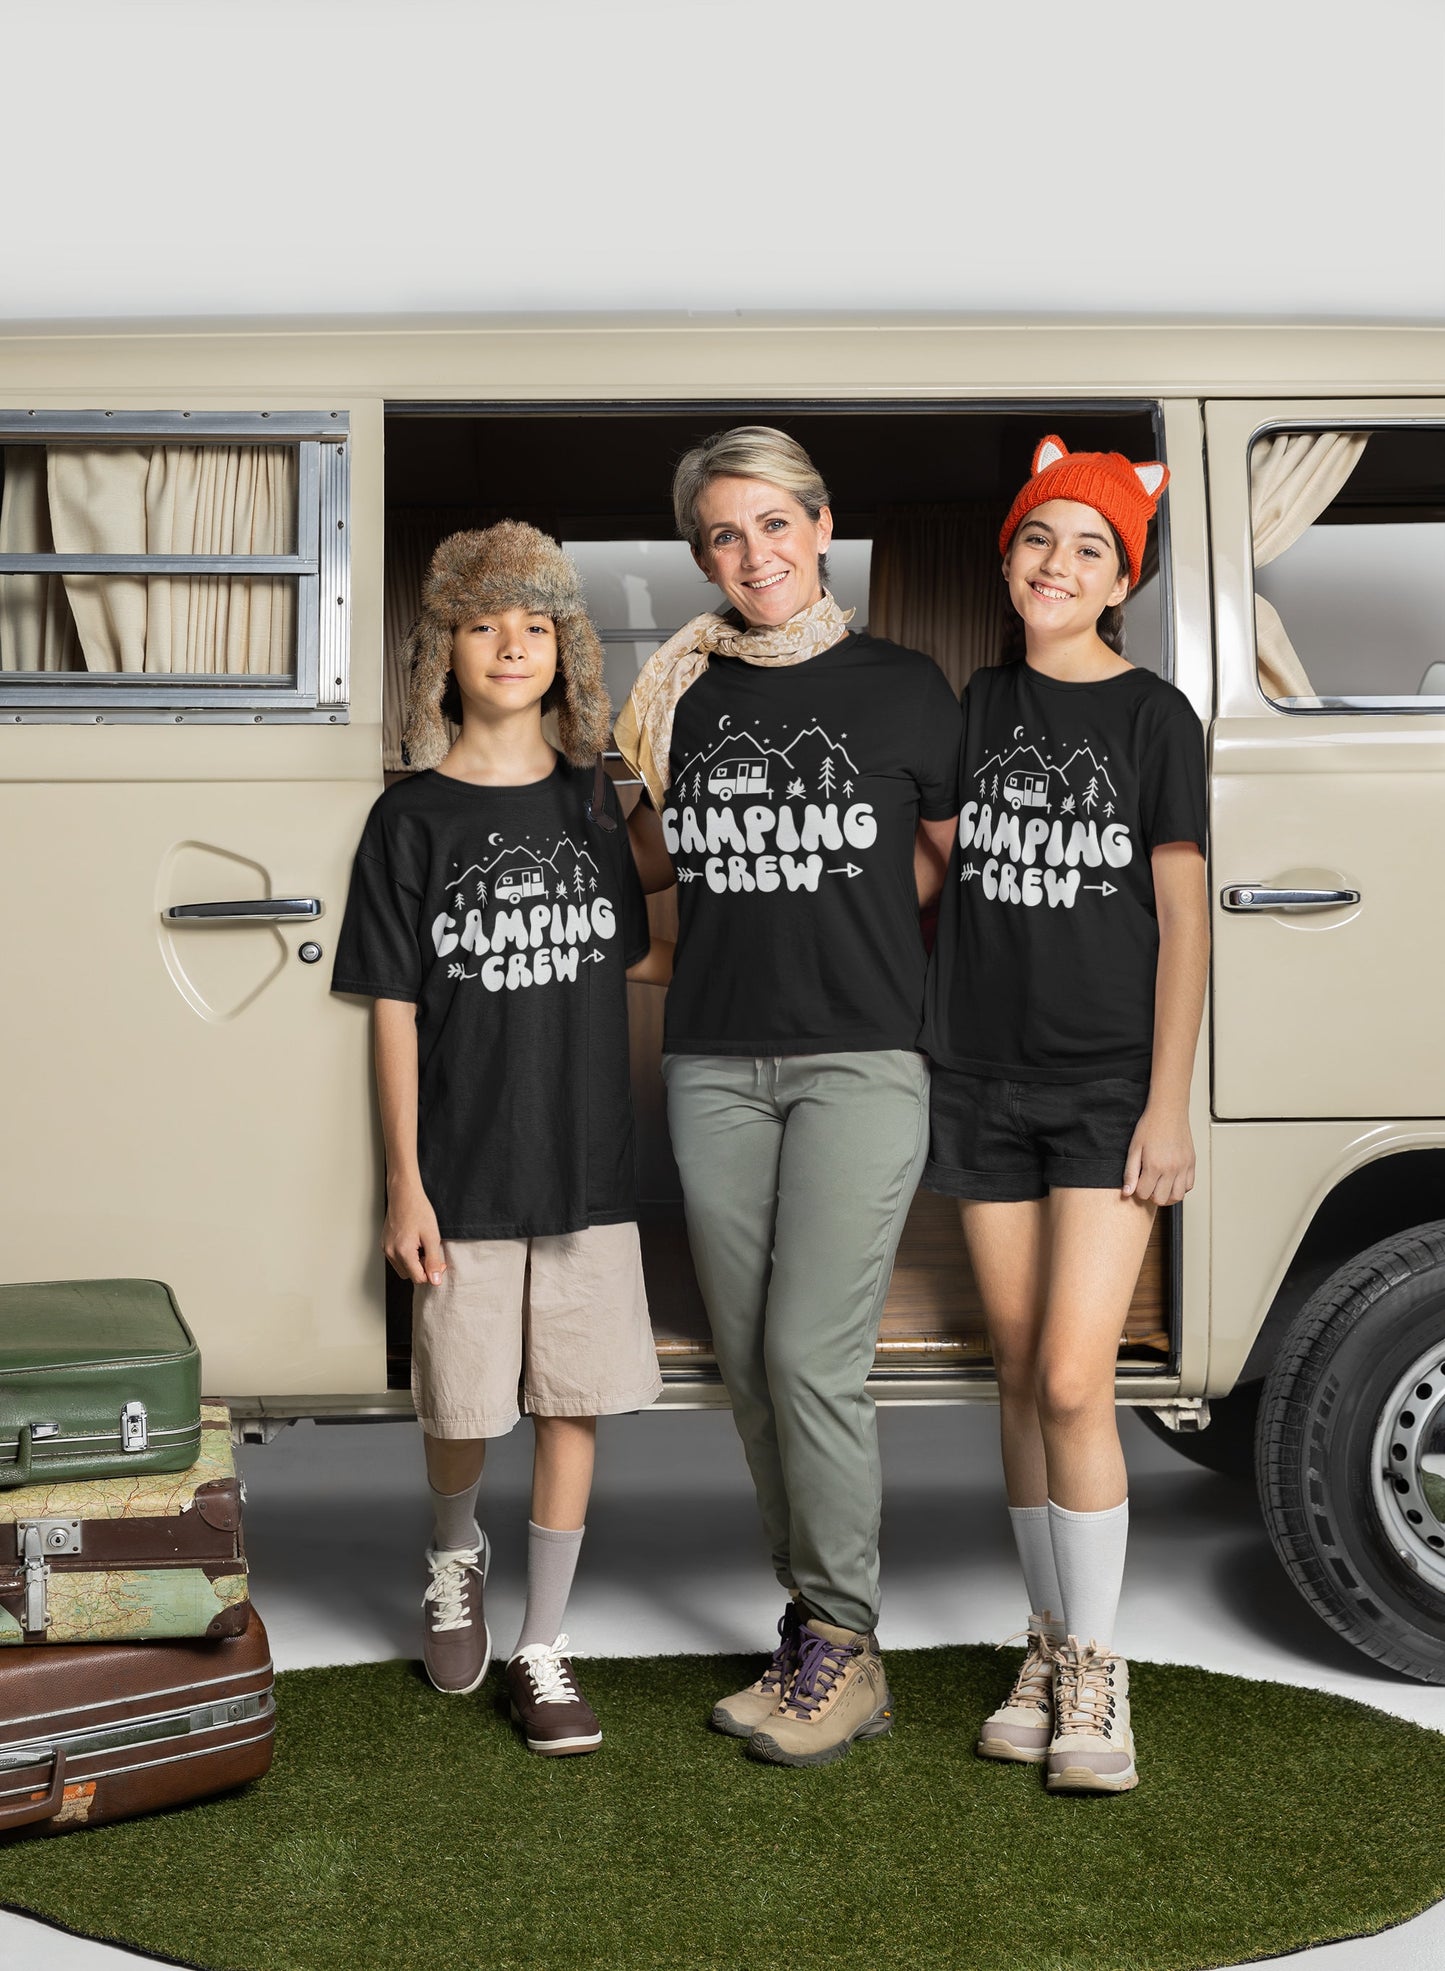 Family camping wearing Camping Crew shirts in black color